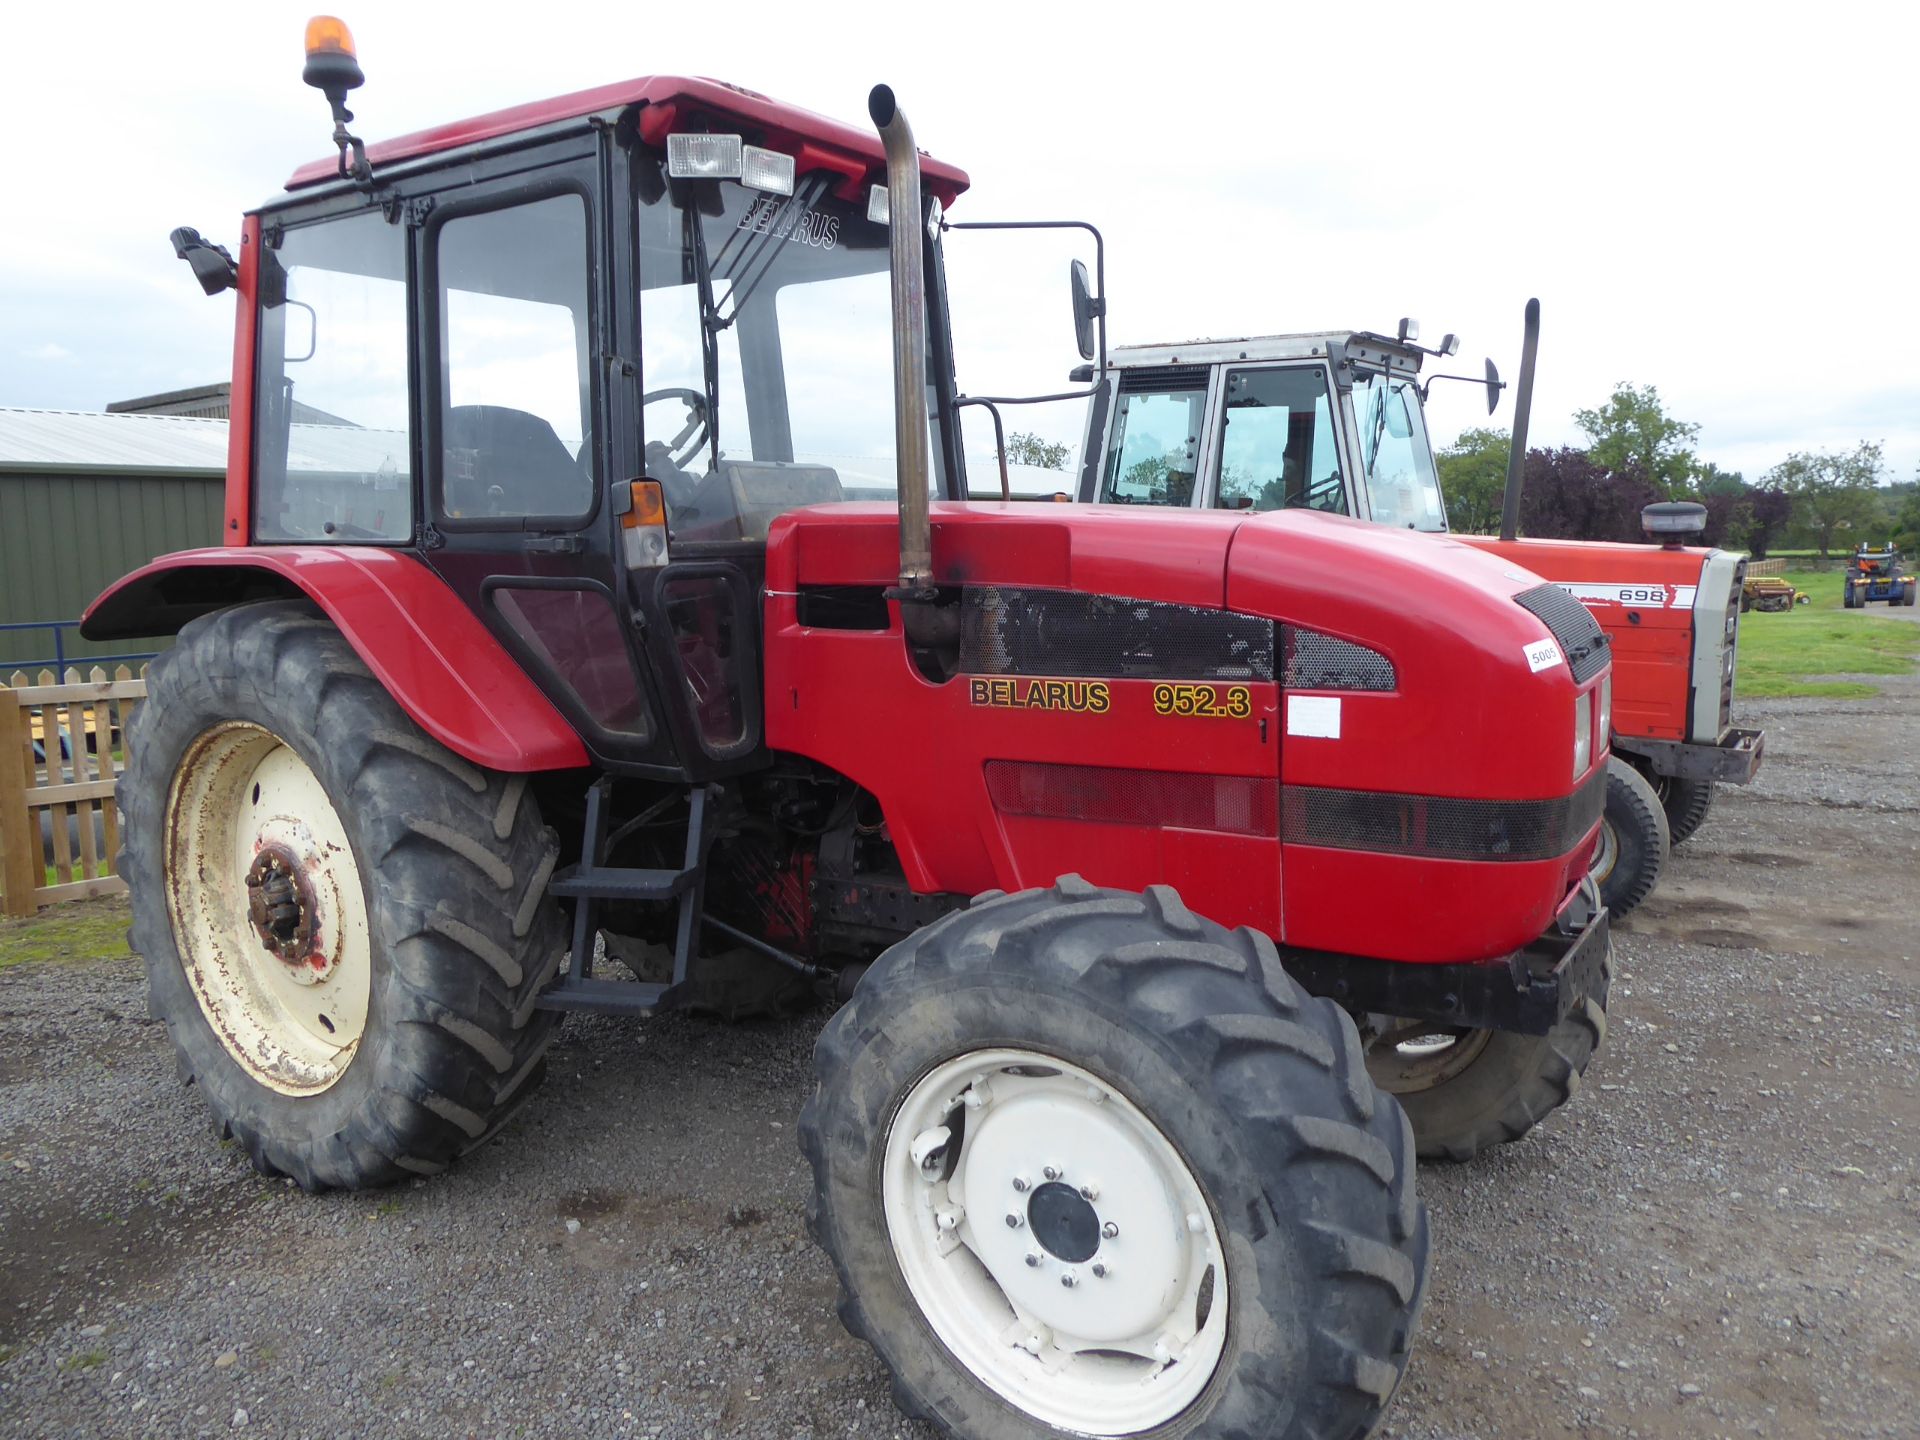 Belarus 9540 4wd 96hP tractor c/w V5 one owner from new